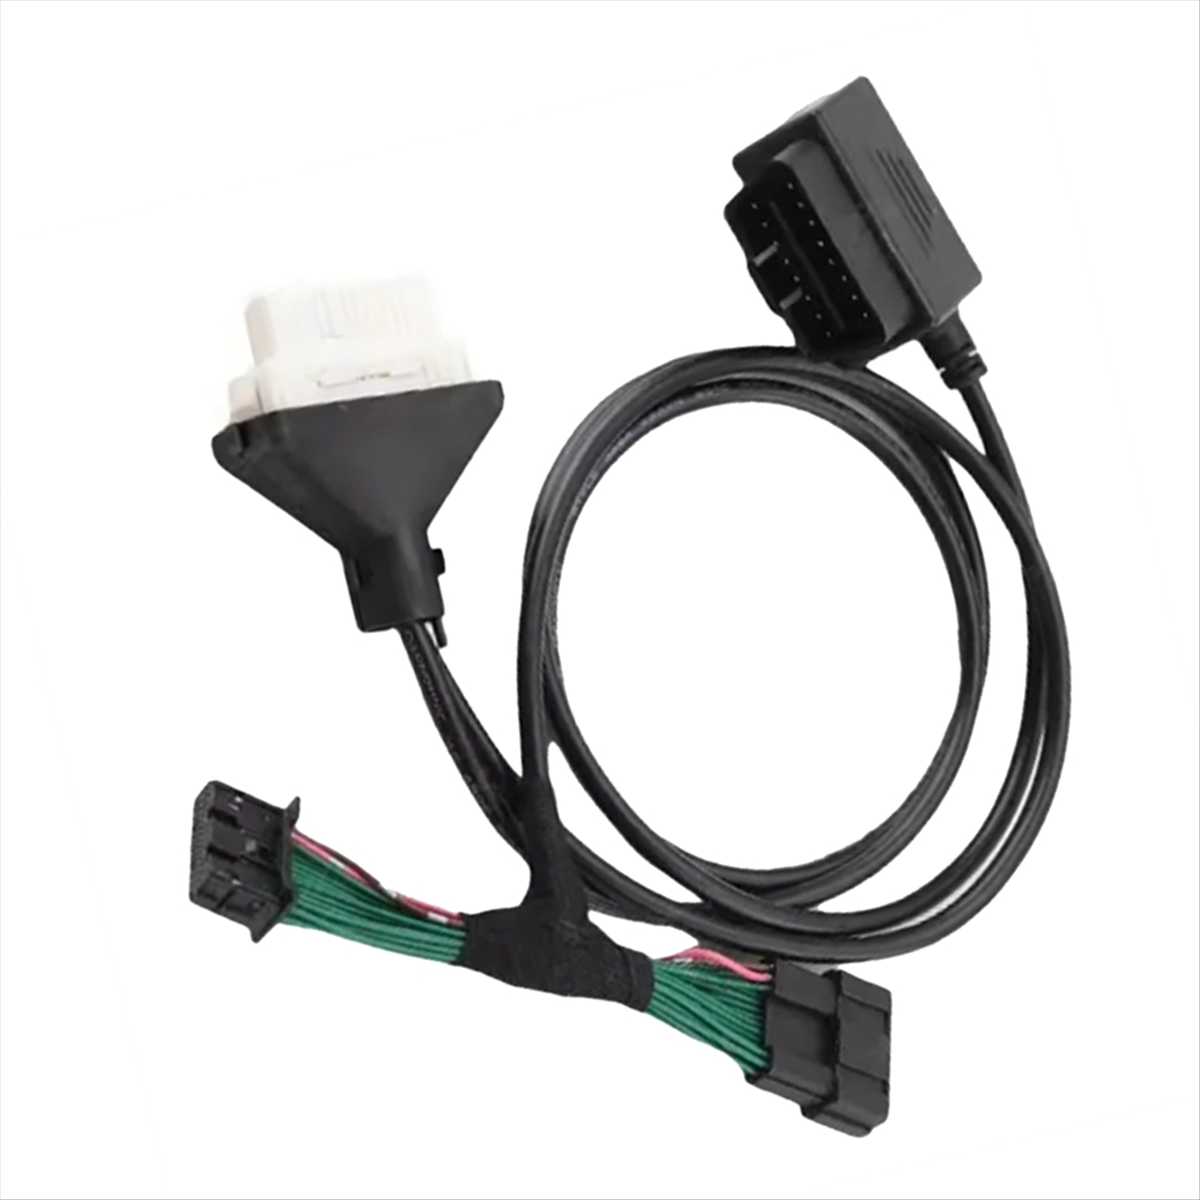 Toyota-30 Cable 8A-BA 4A Smart Key Cable for OBDSTAR Autel IM508 IM608 K518 Xhorse Key Tool Plus for TMLF19T TMLF19D